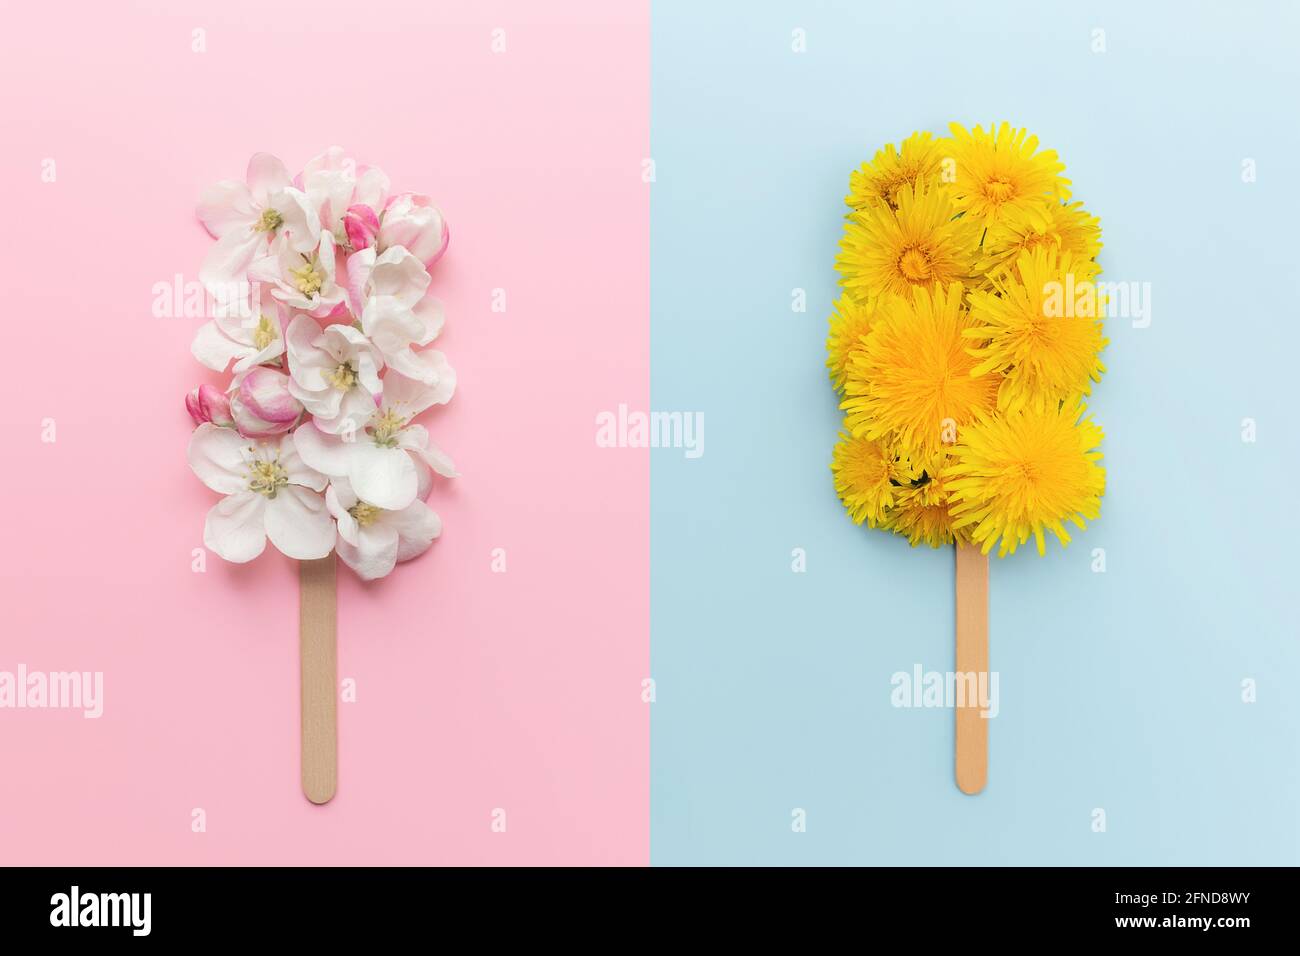 Collage on pink and blue background with blossom ice cream lolly on stick Stock Photo